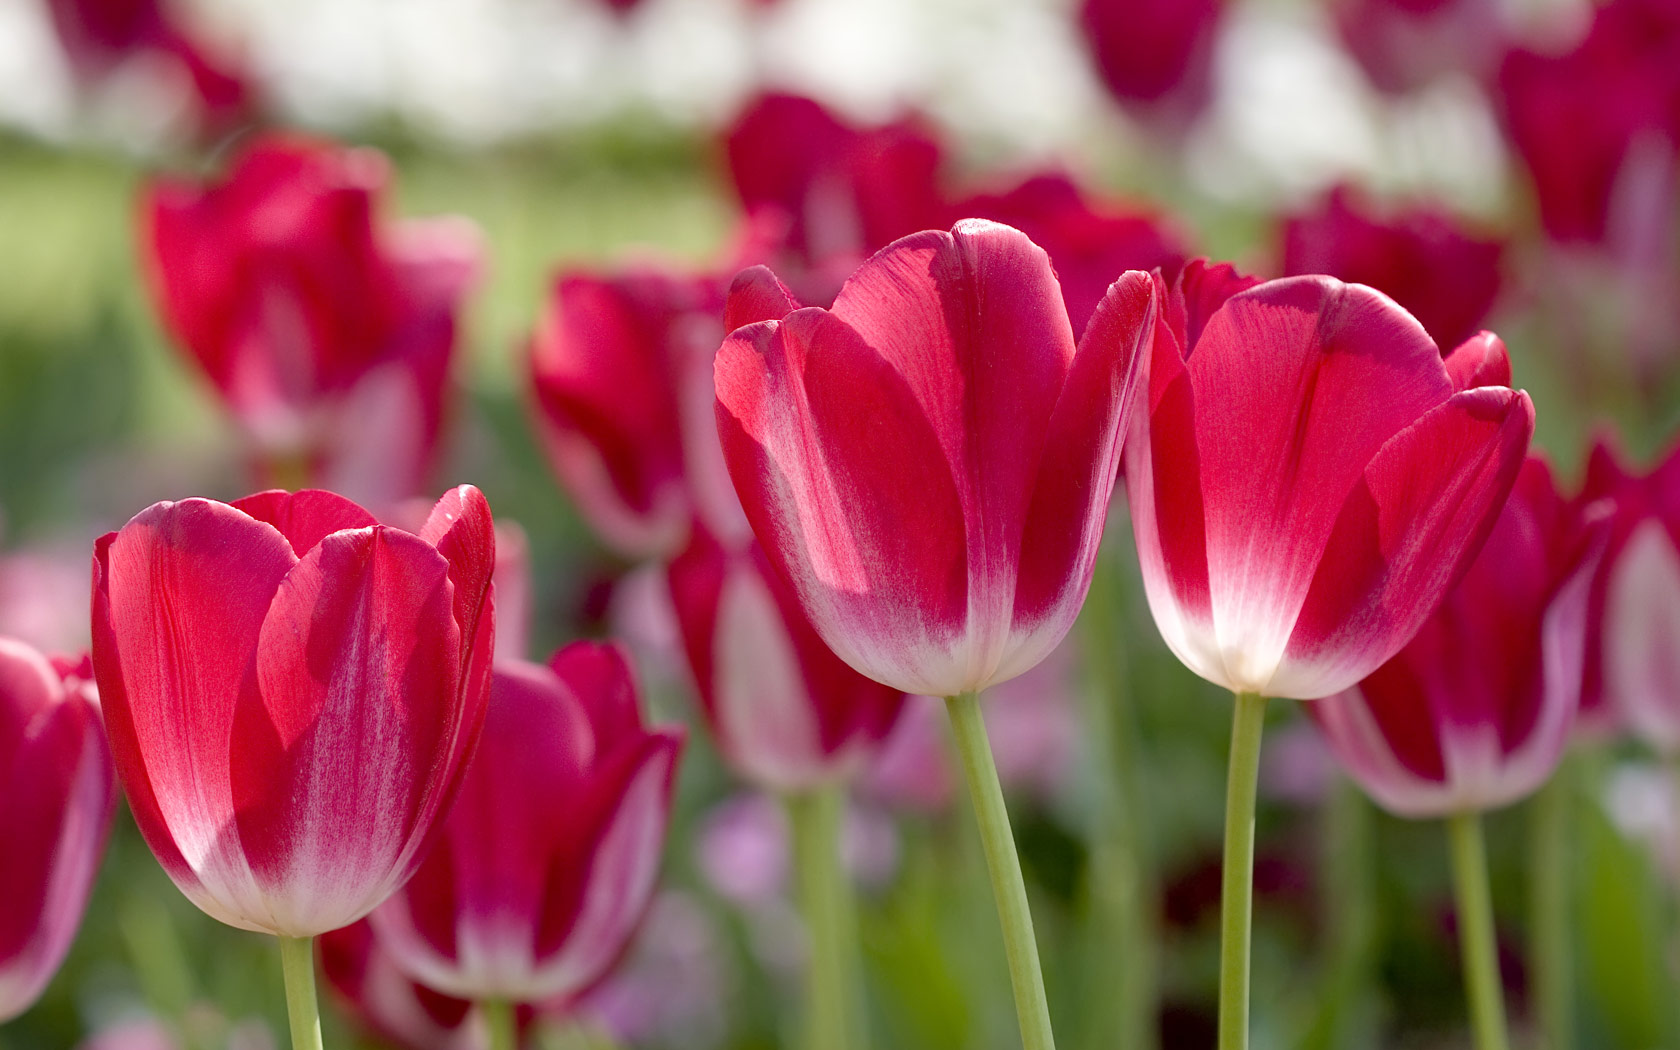 Flowers HD Wallpapers | 4 HD Wallpapers - Part 5